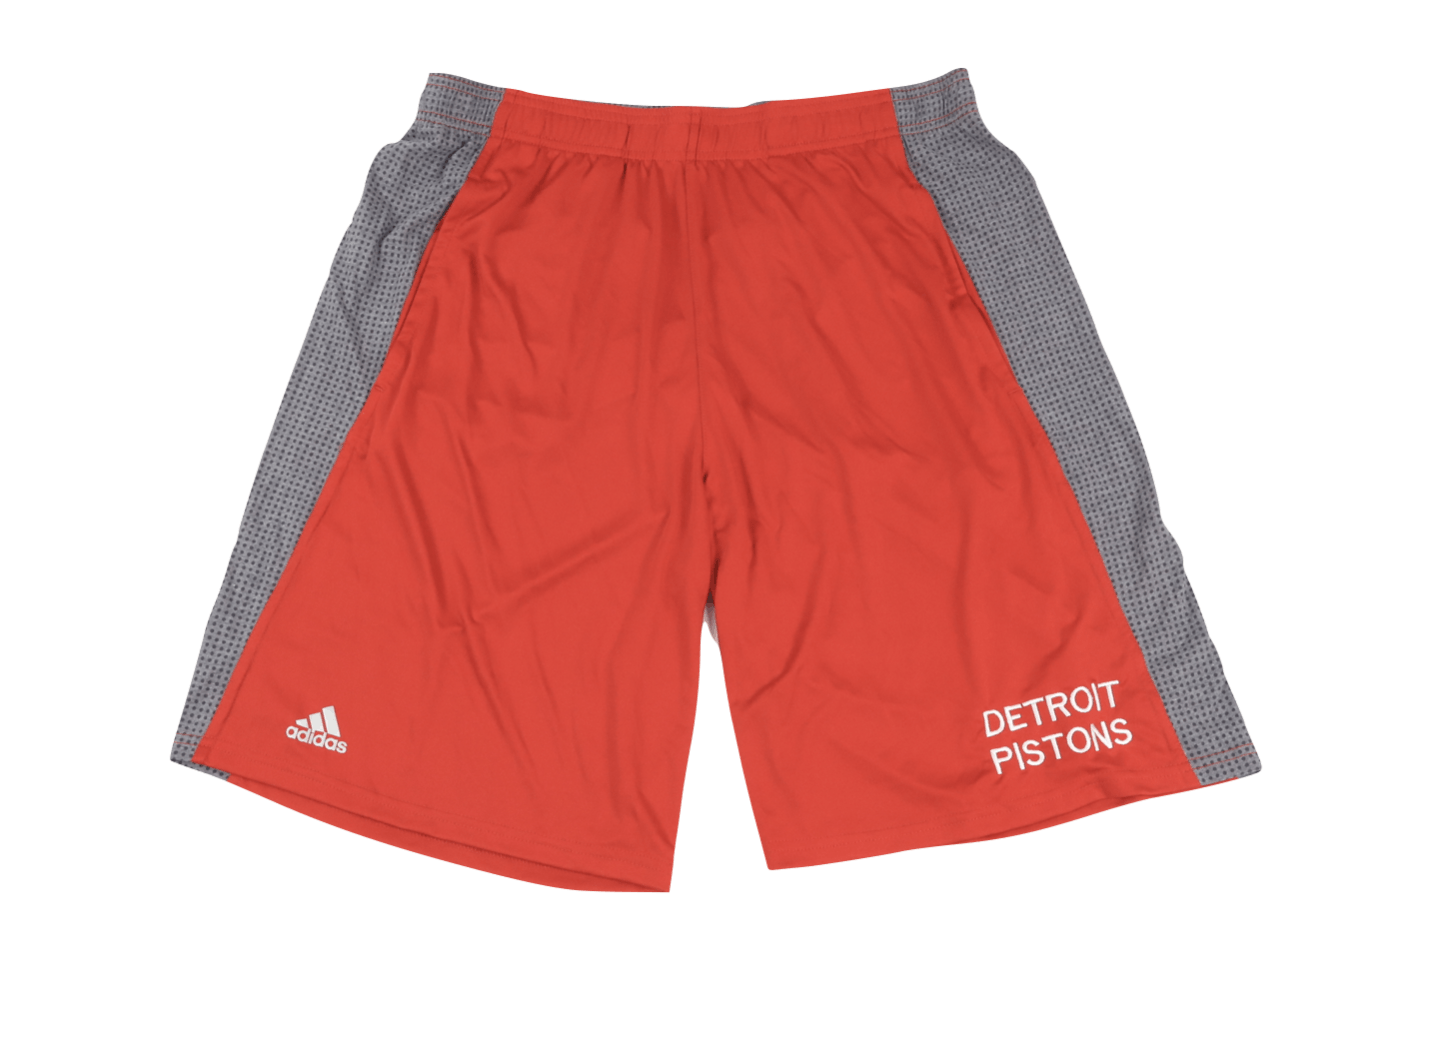 Adidas New Adidas NBA Detroit Pistons Practice Shorts Team Issued Size US 36 / EU 52 - 1 Preview